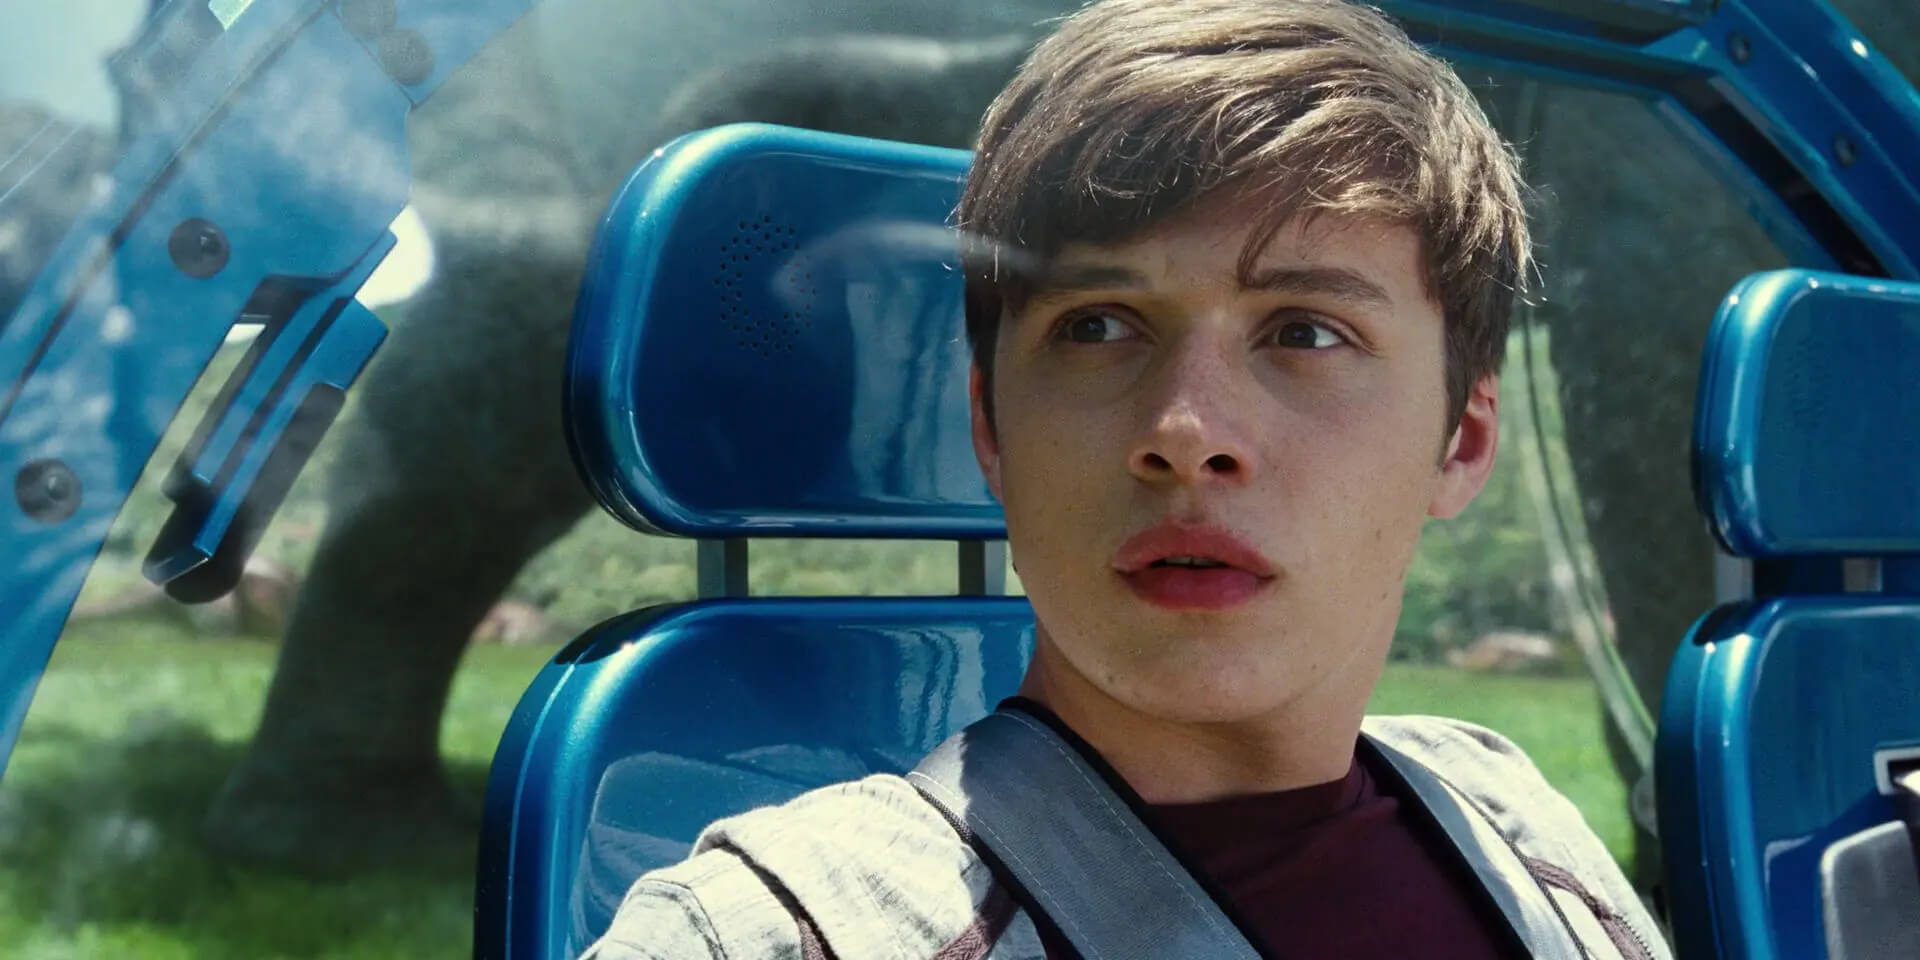 Nick Robinsion, “Zach” From ‘Jurassic World,’ Wishes To Return To The Franchise